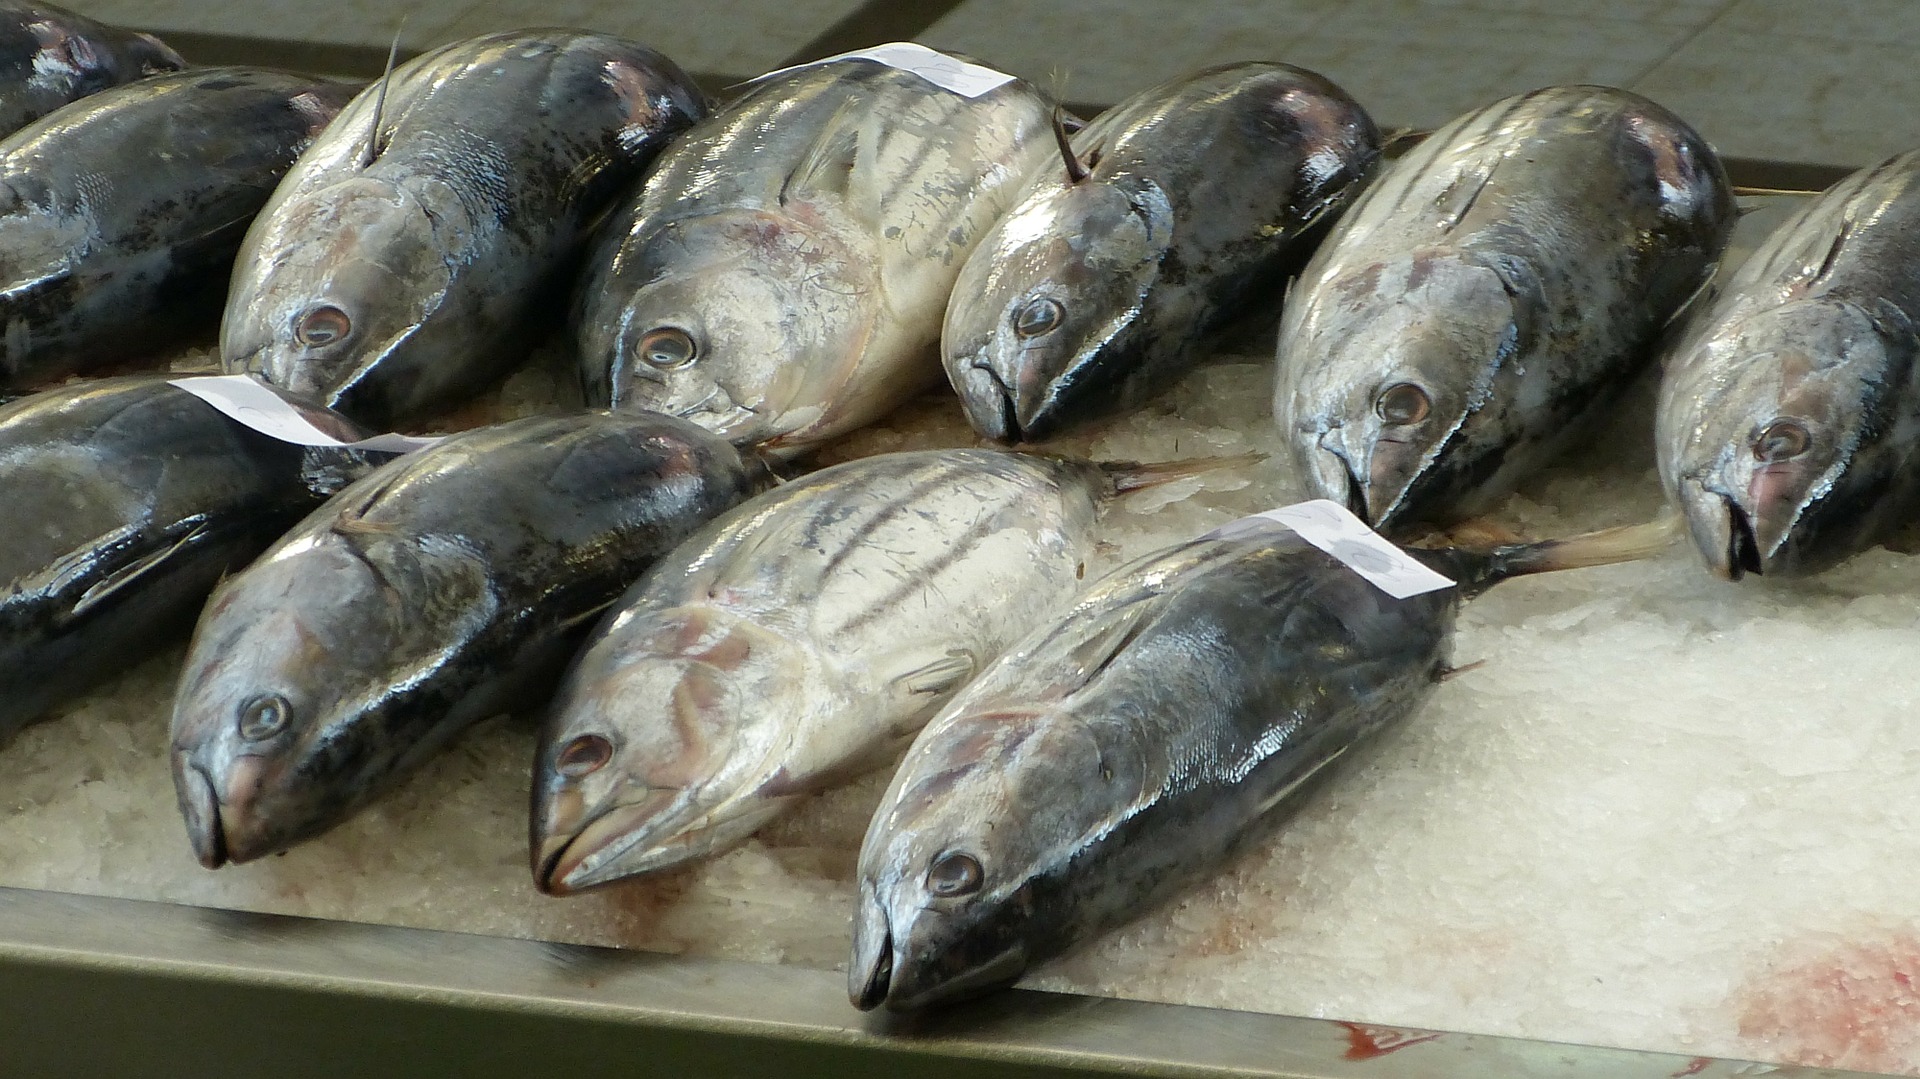 98 percent of Indonesian fishery products received by 171 countries